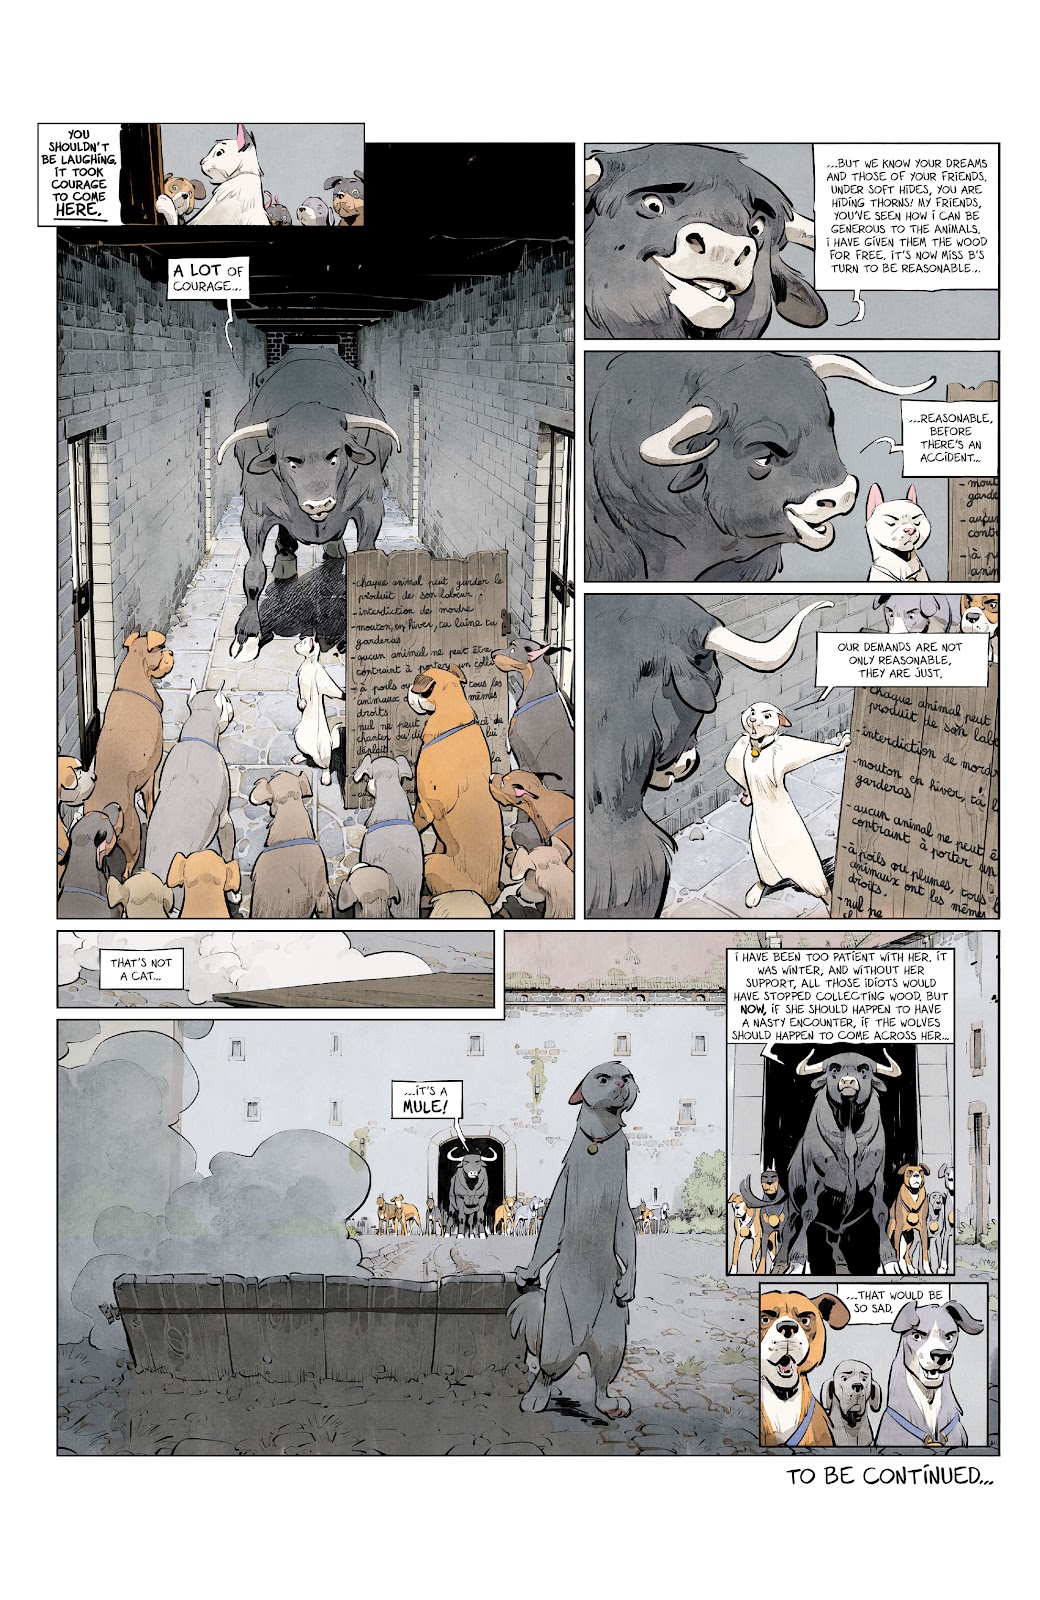 Animal Castle Vol. 2 issue 1 - Page 23